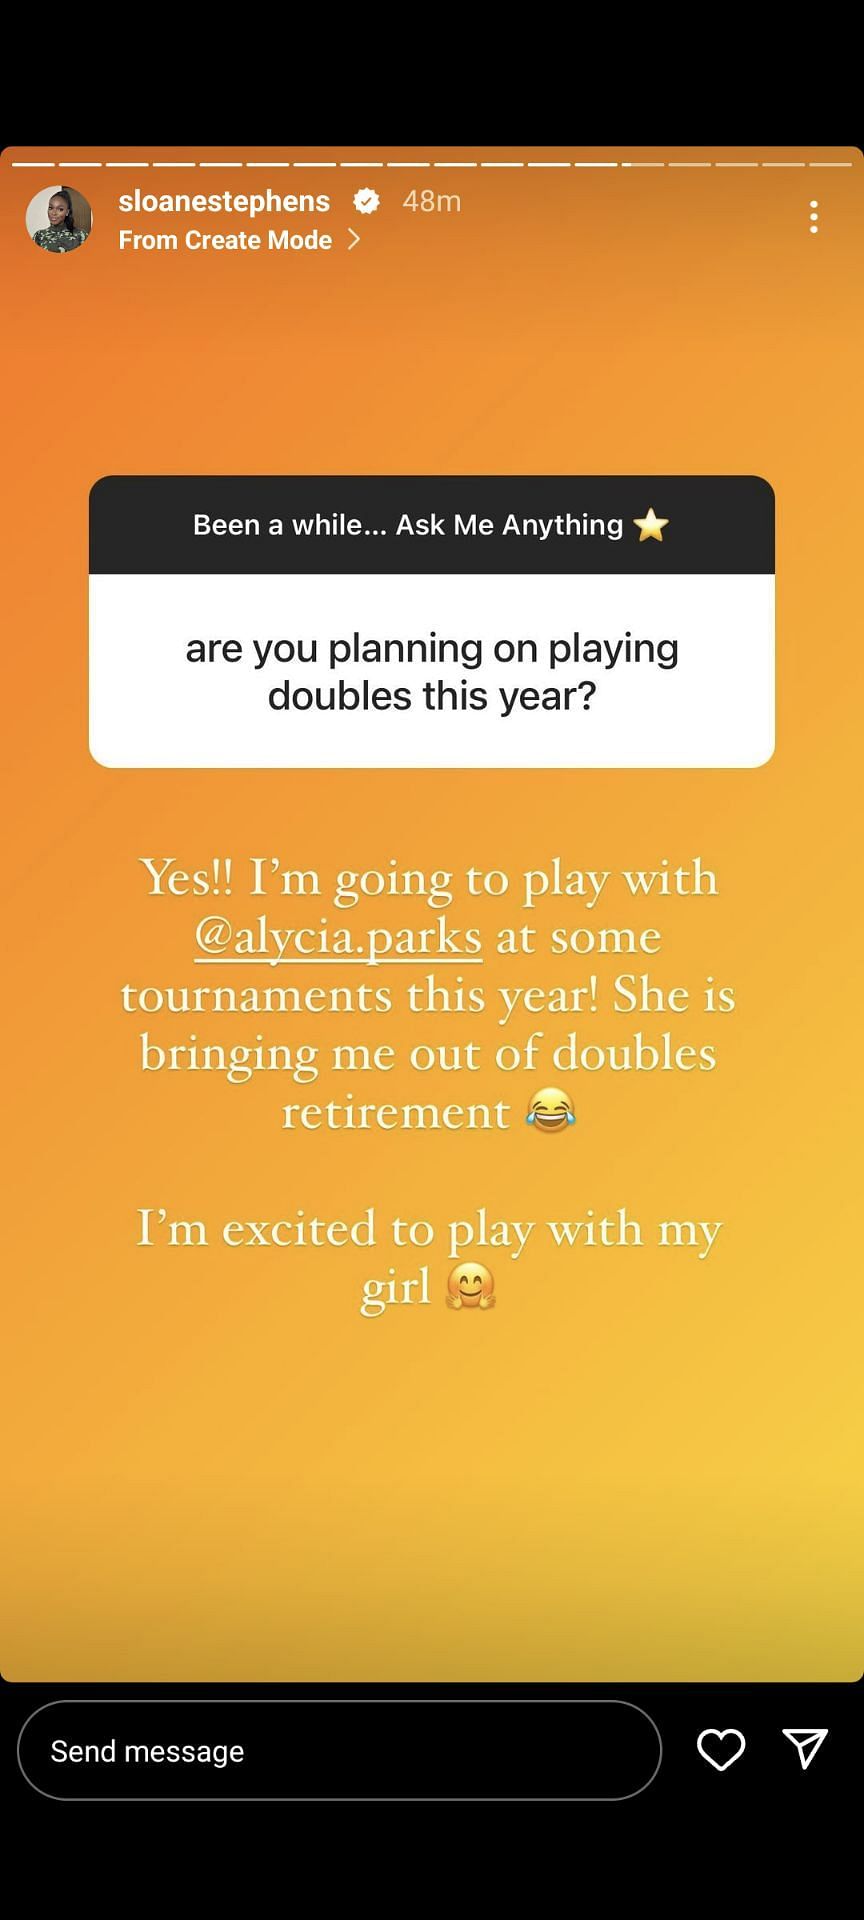 Stephens on playing doubles